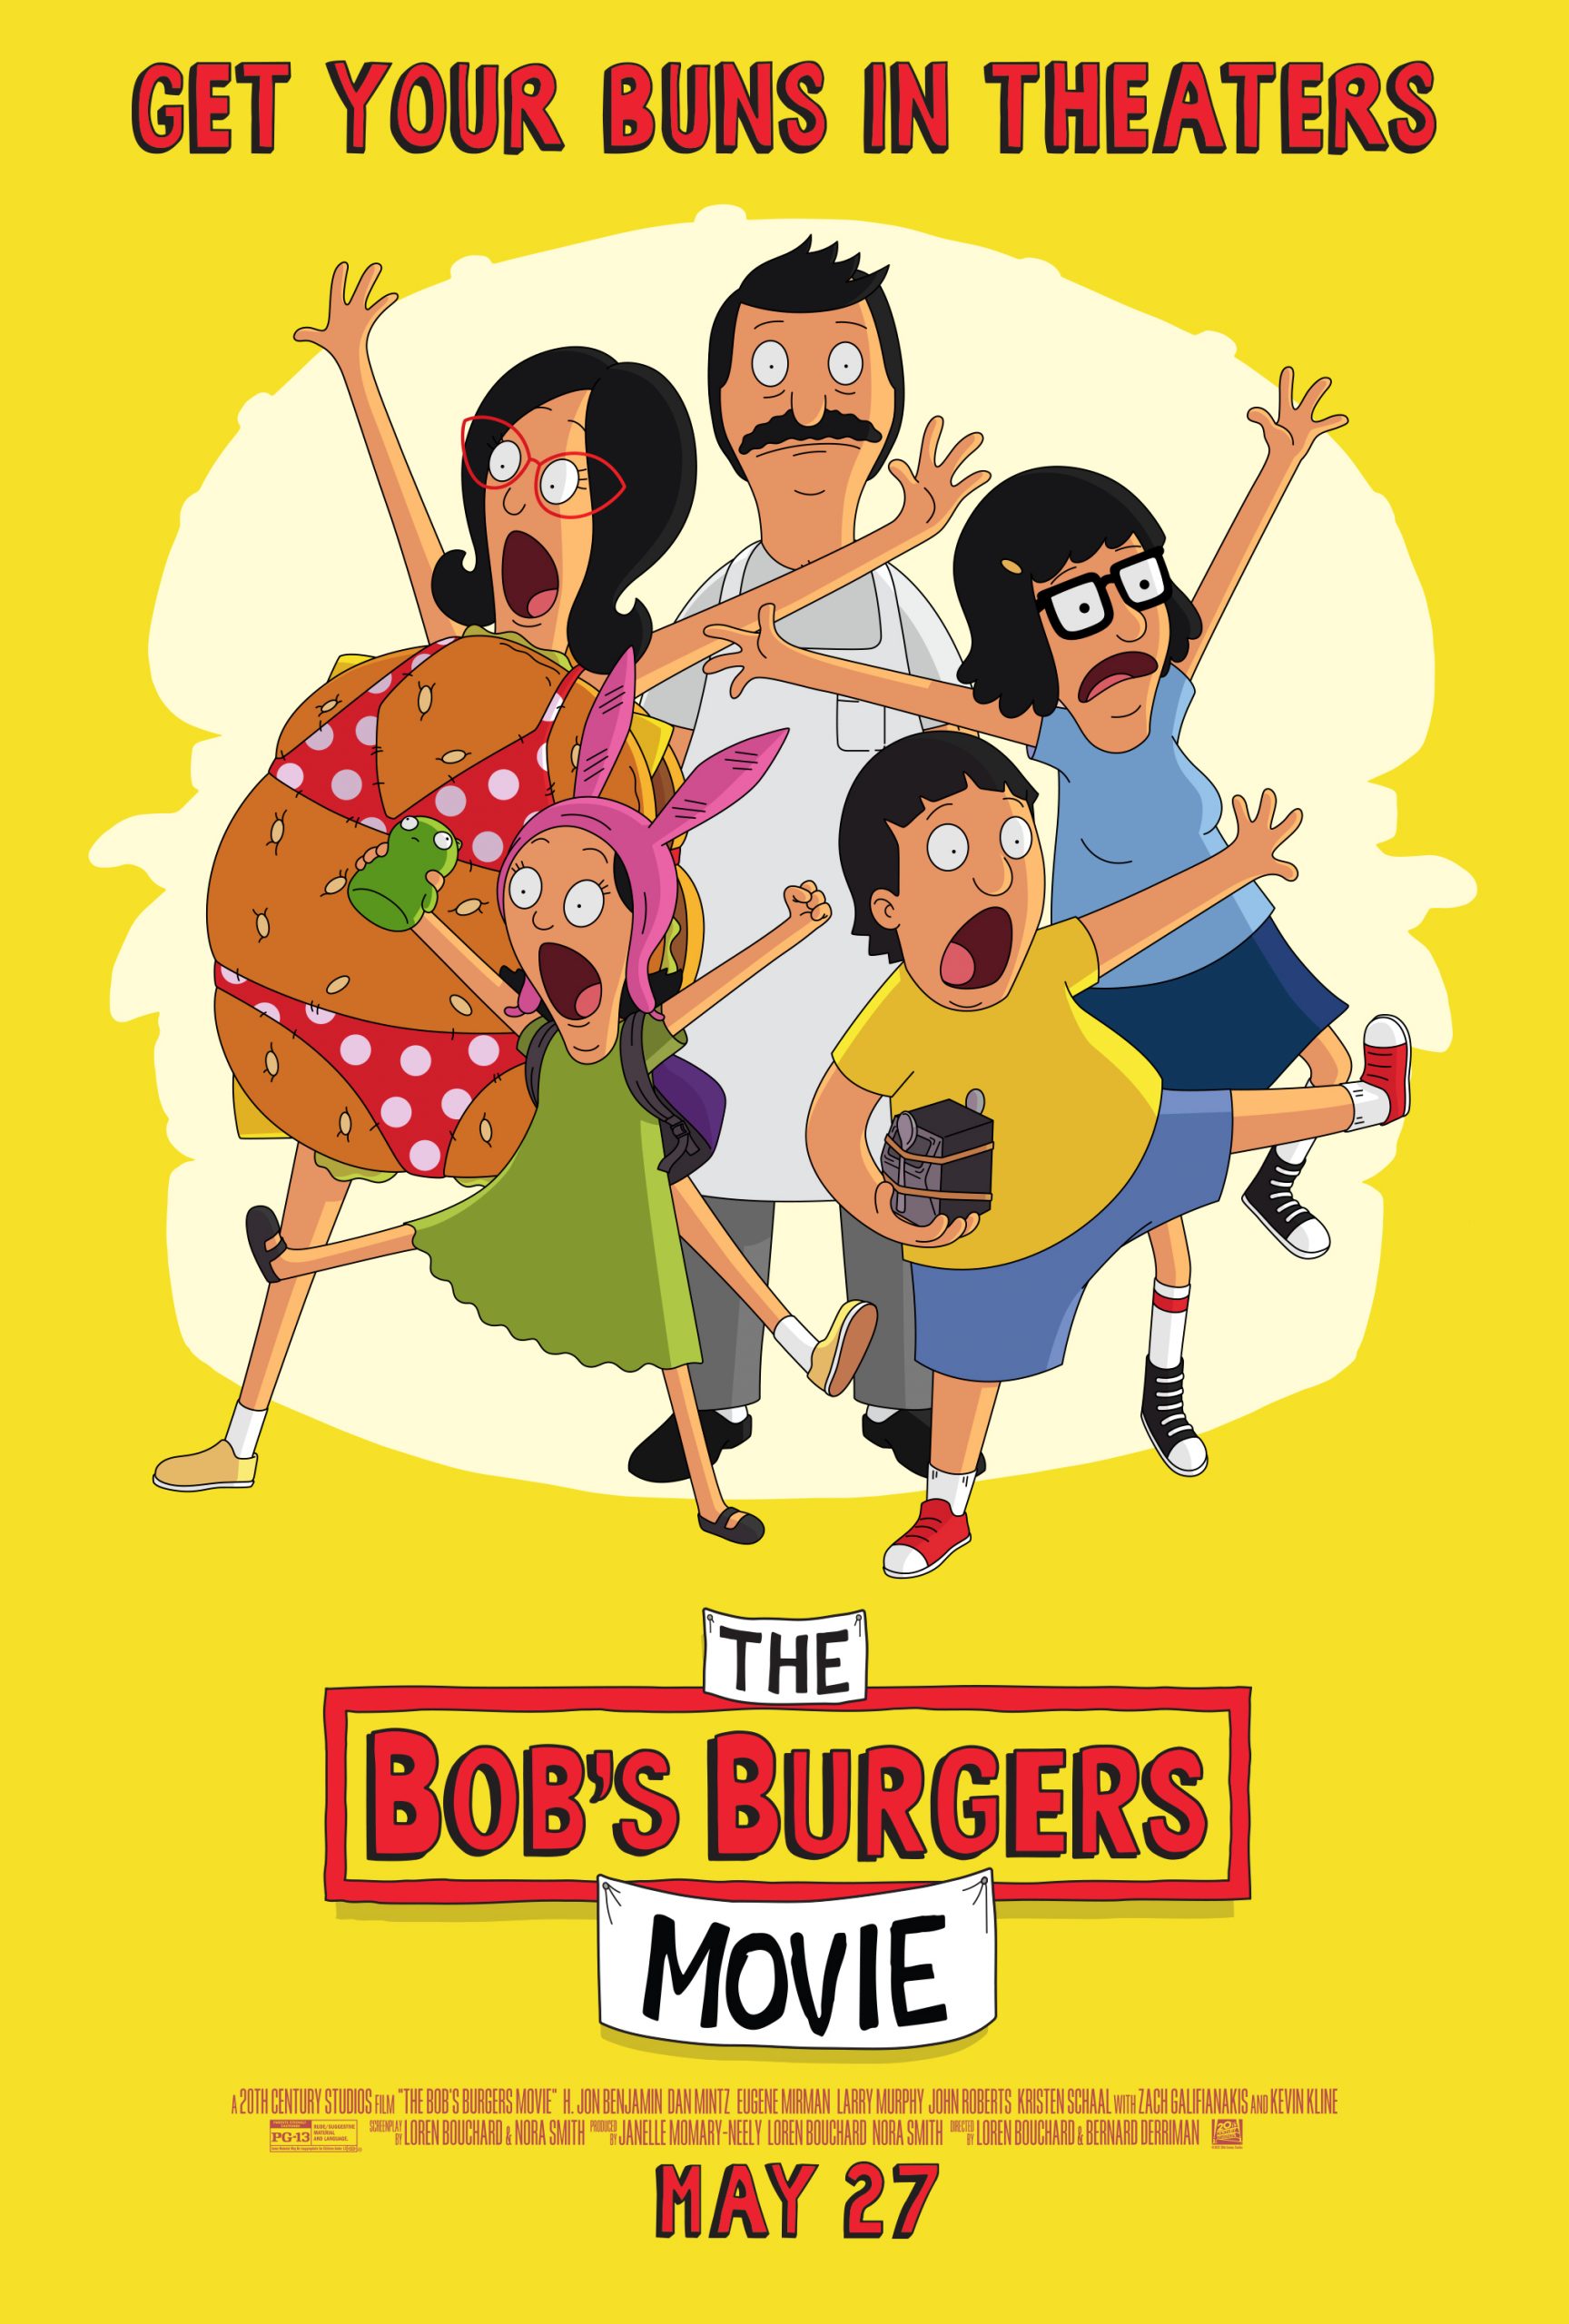 REVIEW: #39 The Bob #39 s Burgers Movie #39 is a hilarious must see for fans of